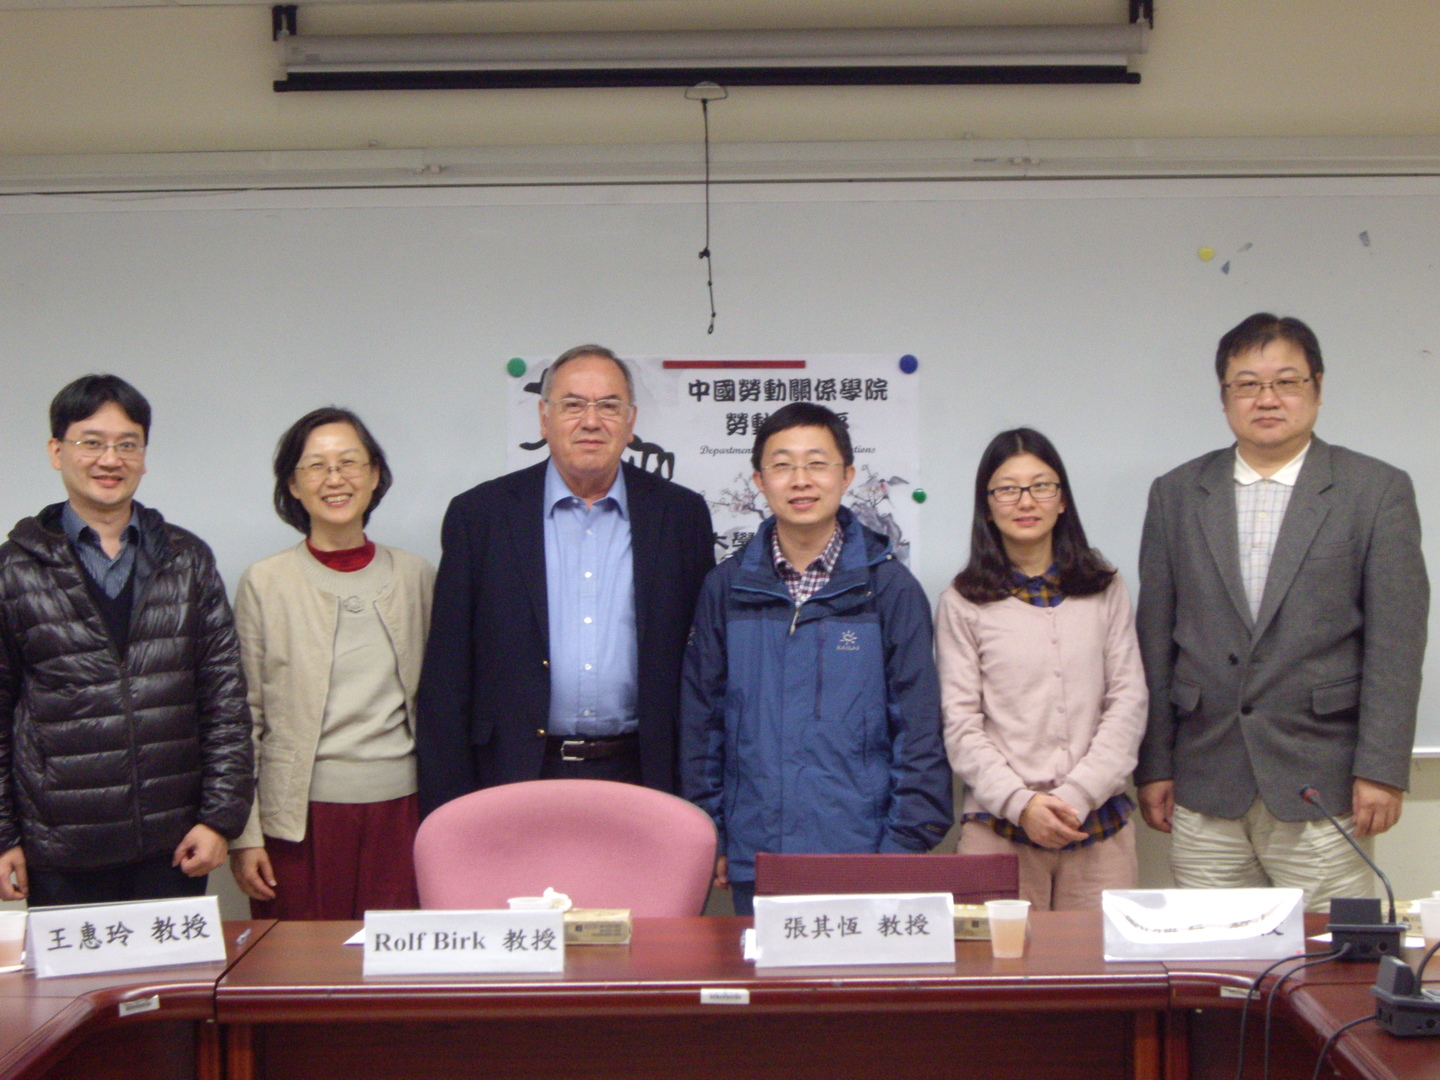 Department of Employment Relations, CIIR visits Institute for Labour Research, NCCU (2014.12.04)